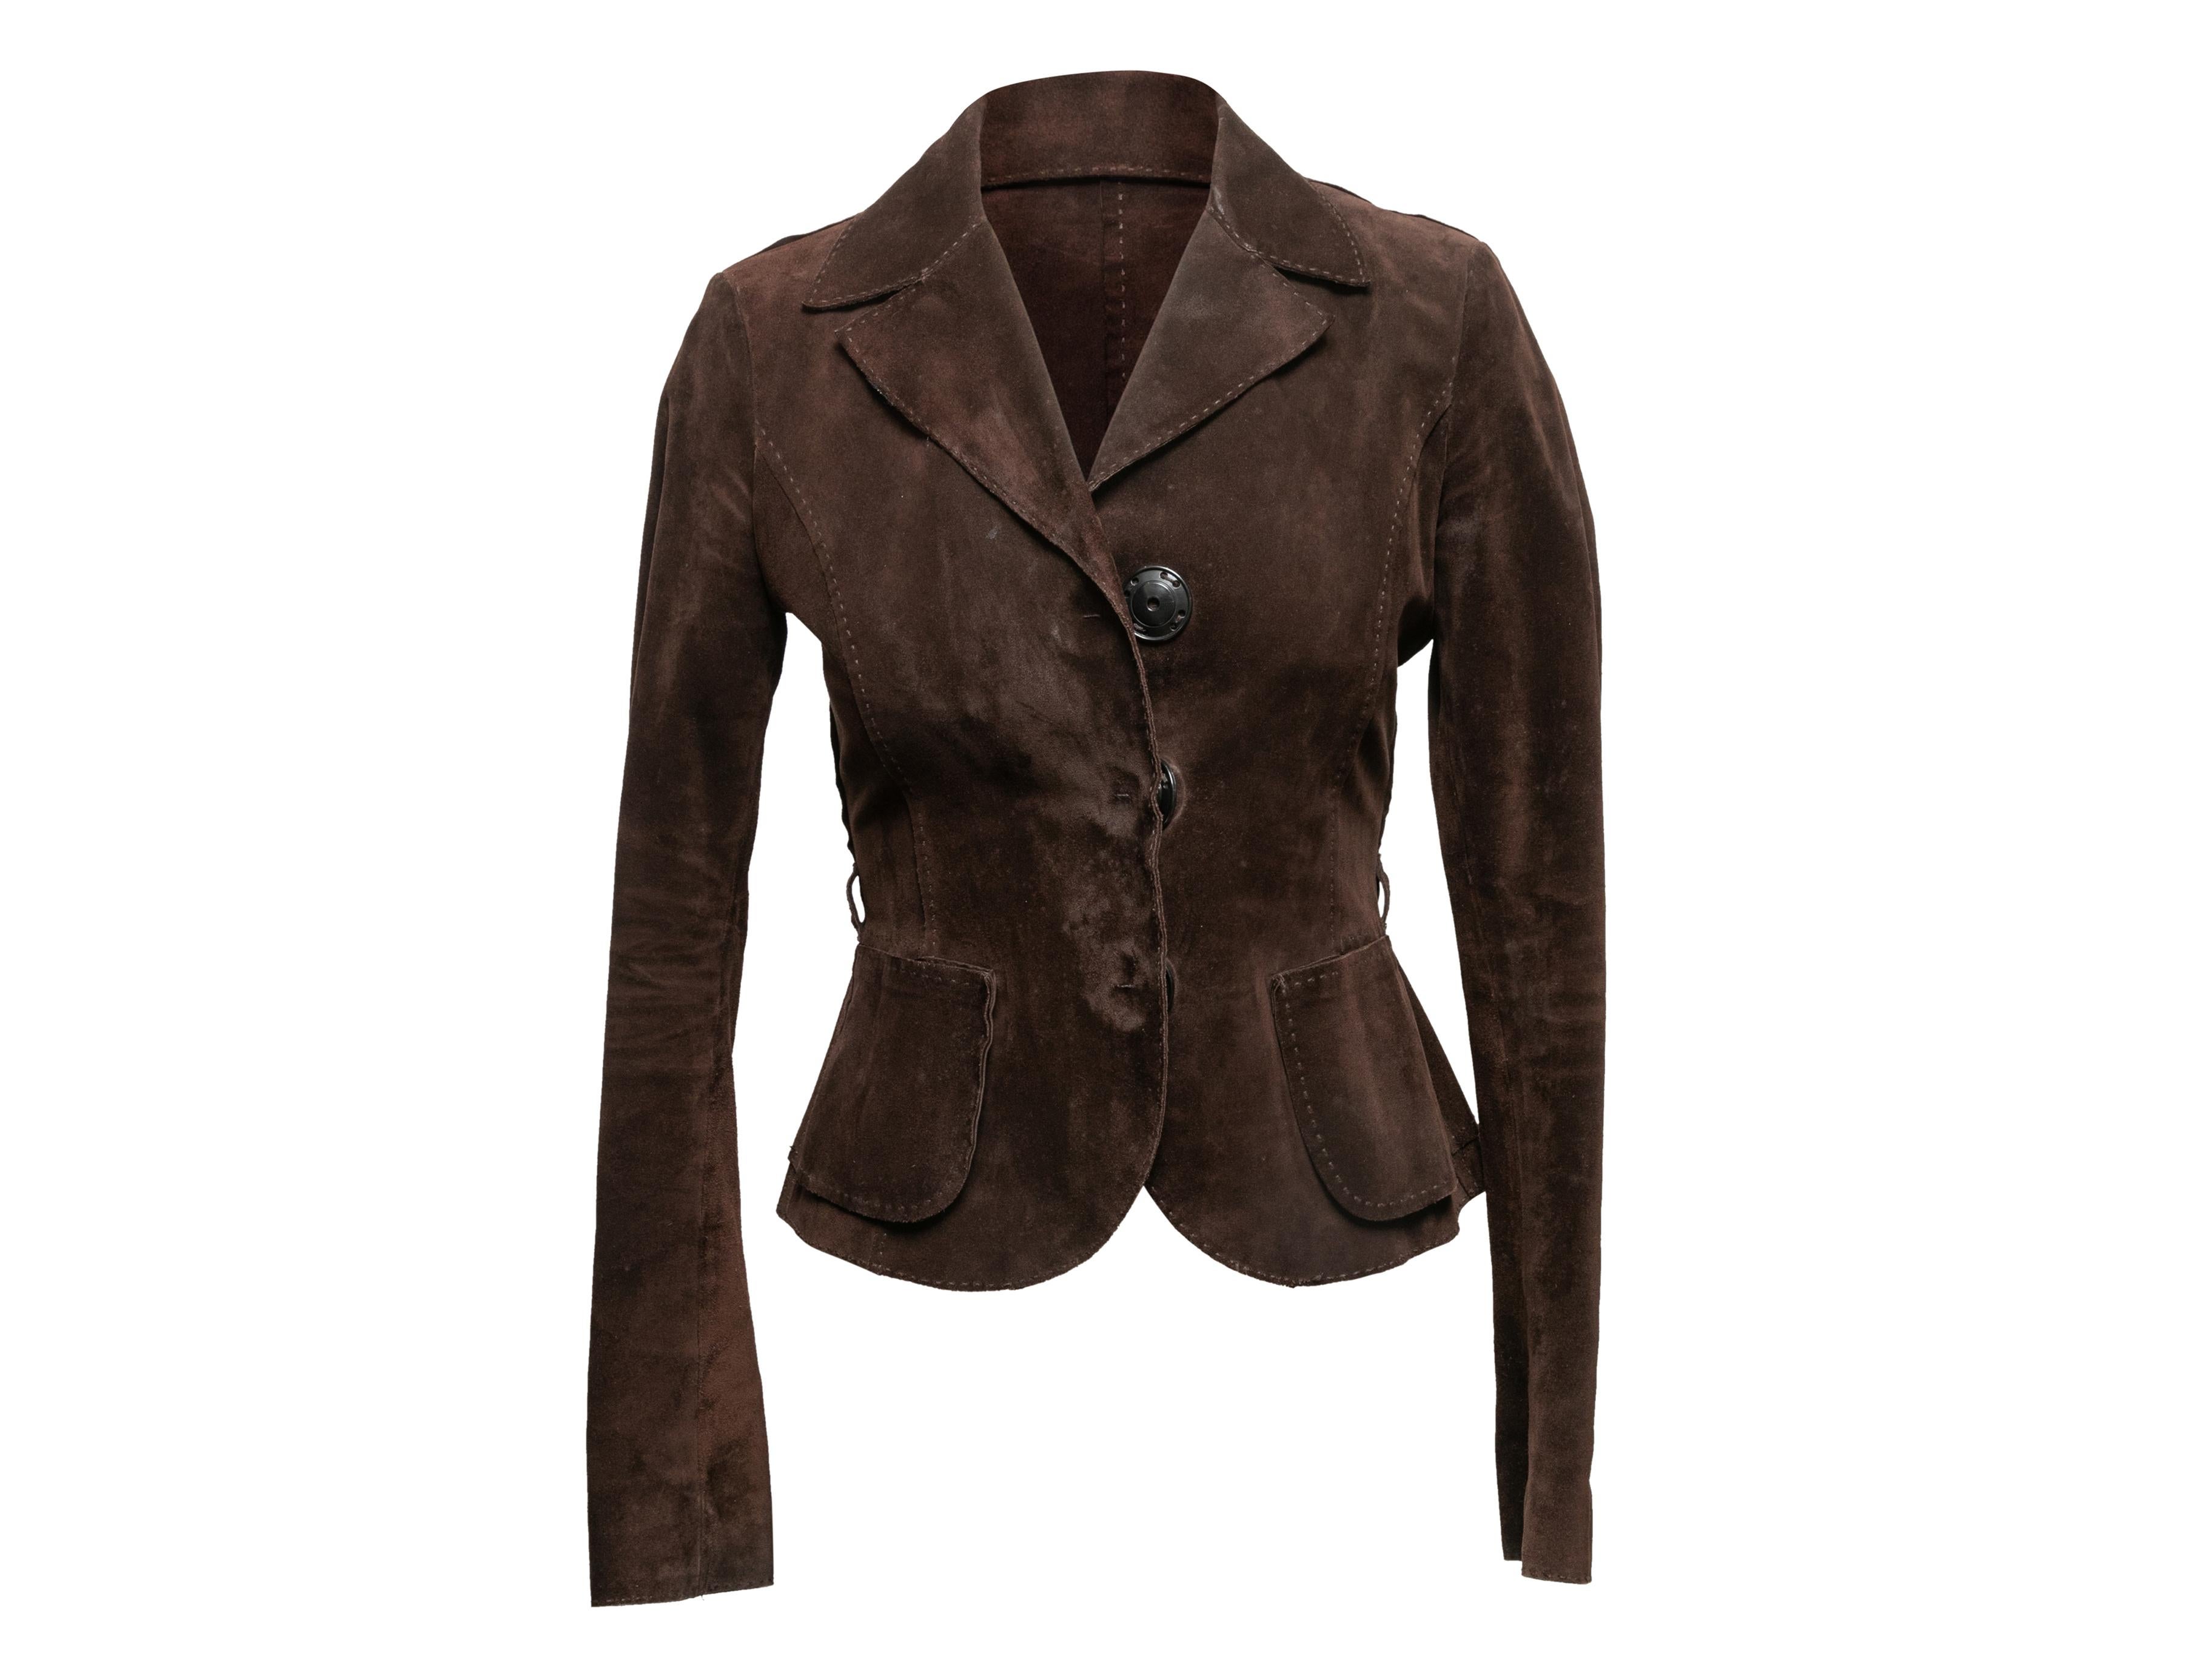 Brown suede blazer by Fendi. Notched lapel. Dual hip pockets. Button closures at front.35